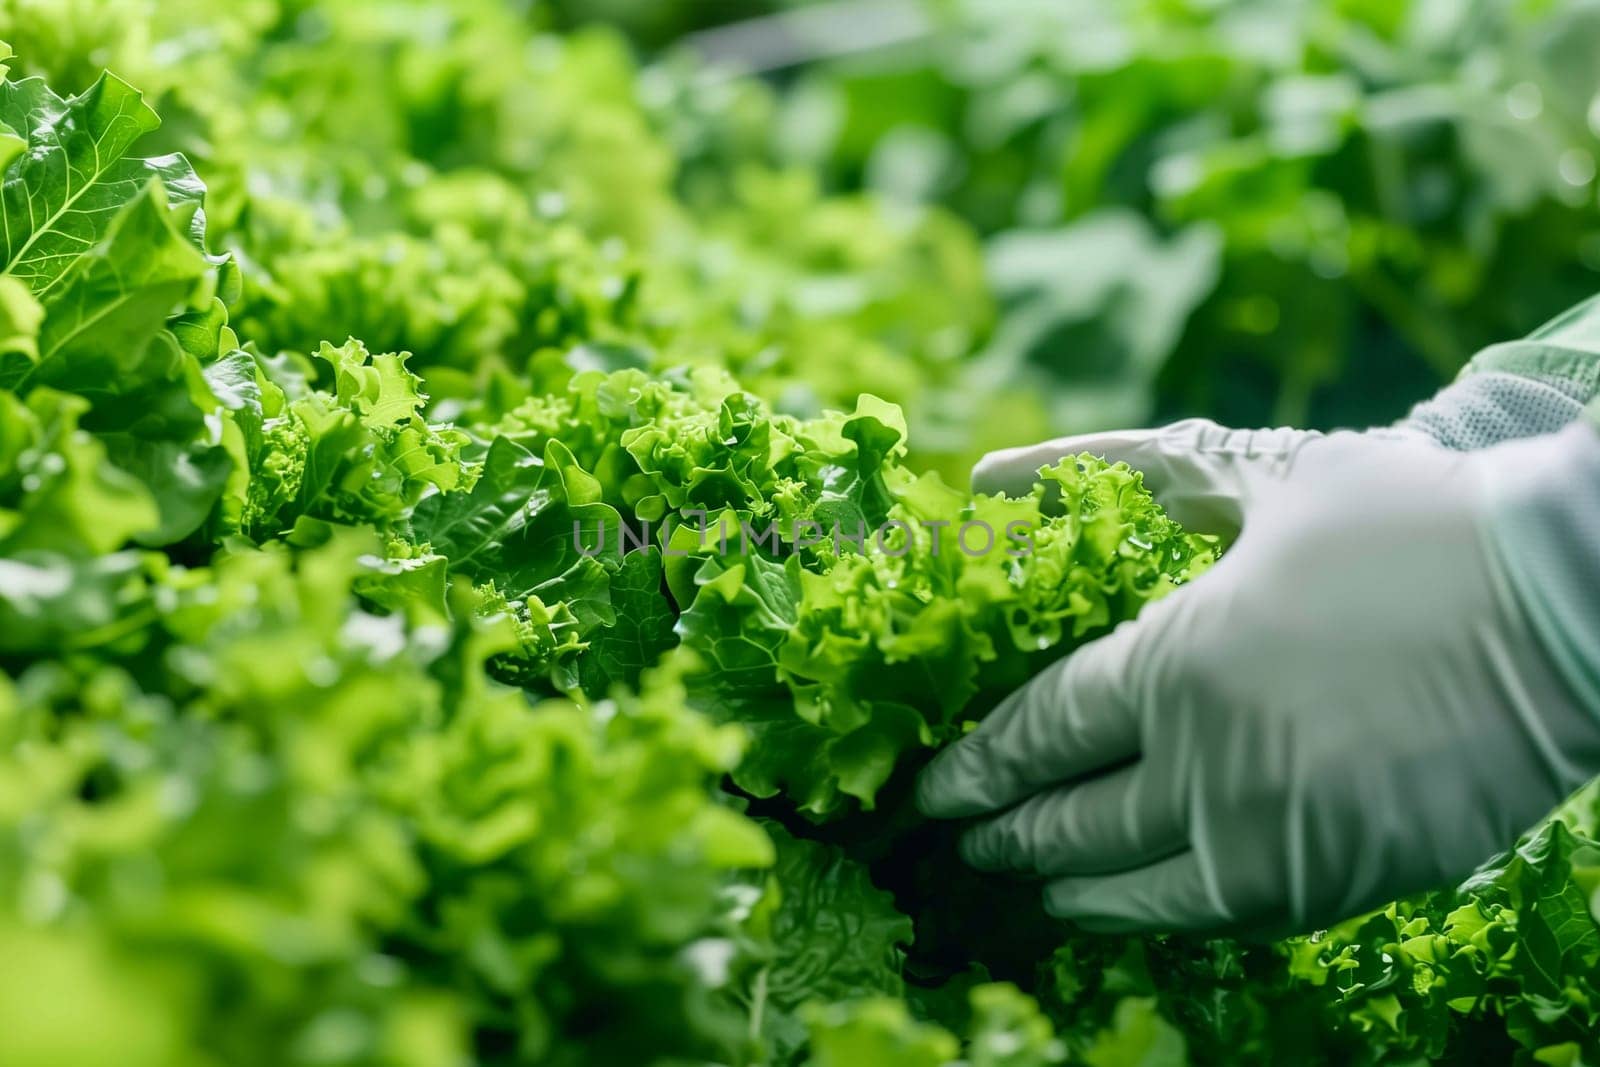 A person wearing gloves is picking fresh lettuce from a field.